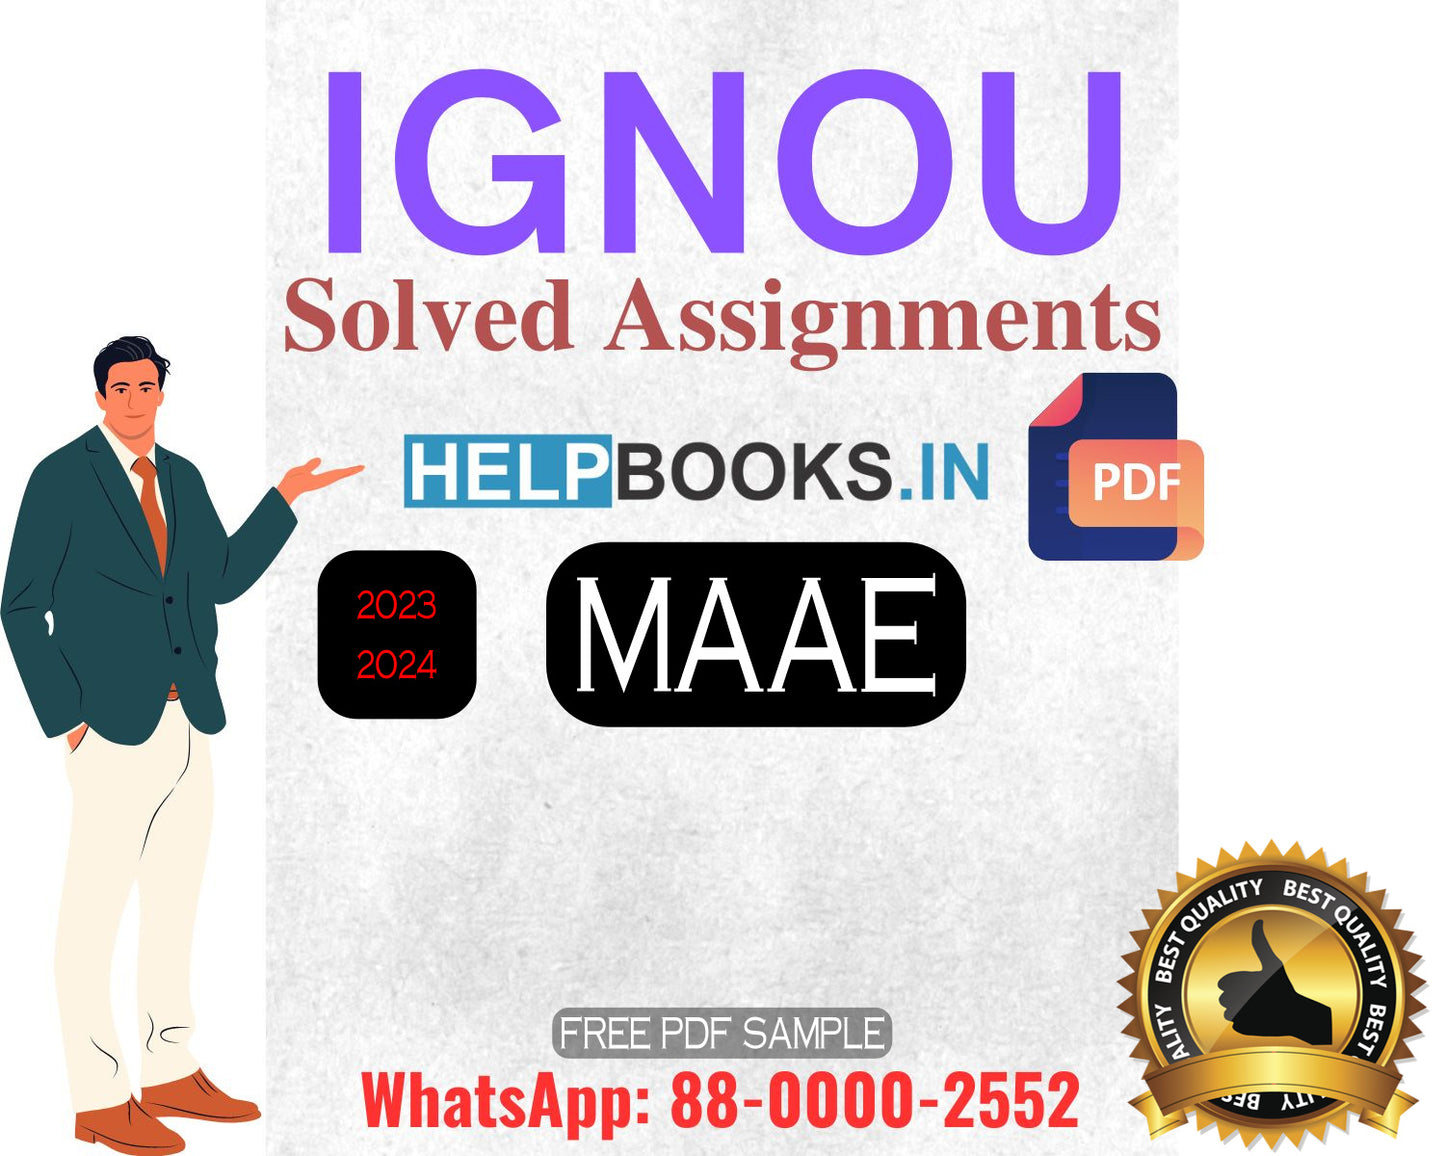 IGNOU Master's Degree Programme Latest IGNOU Solved Assignment 2023-24 : MAAE Master of Arts Adult Education Solved Assignments